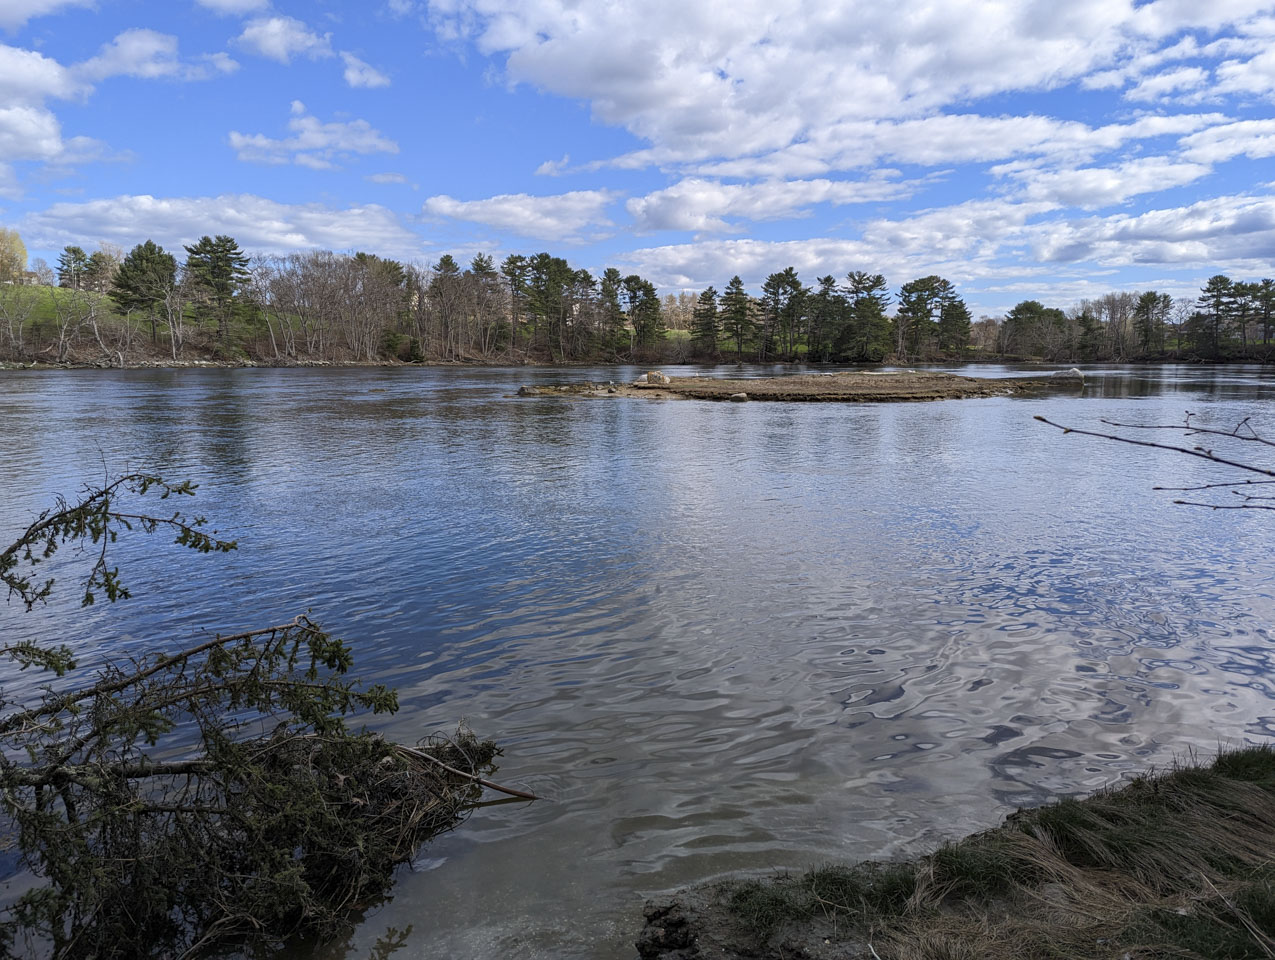 Damariscotta River, looking from Glidden Midden over to Whaleback Shell Midden and Roundtop Farm